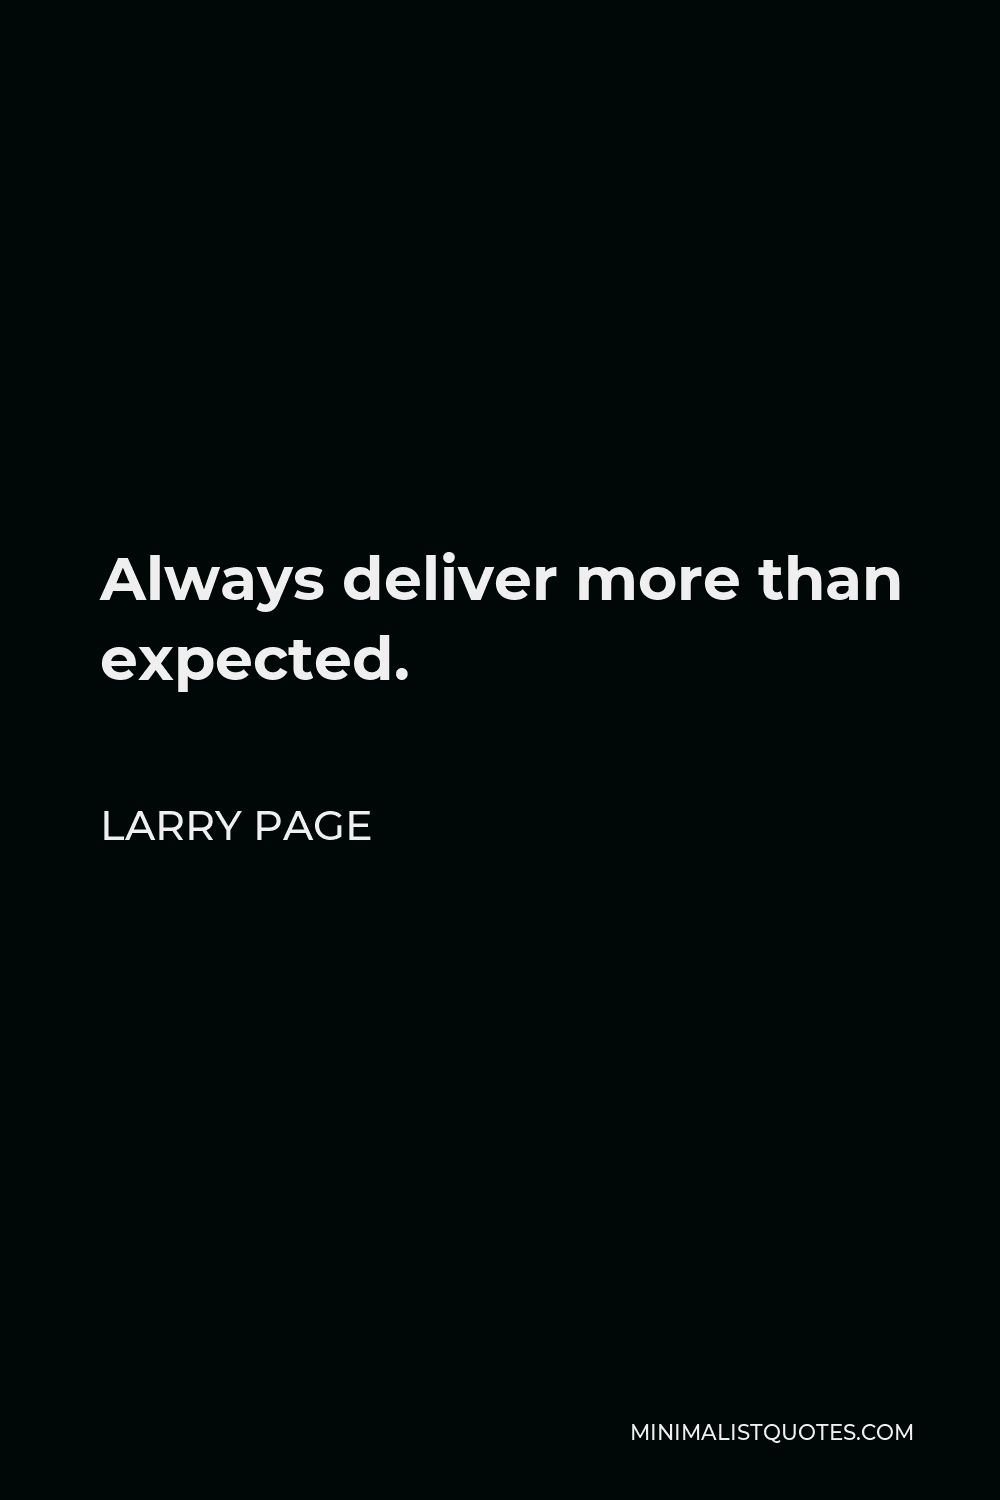 Larry Page Quote: It's quite complicated and sounds circular, but we've ...